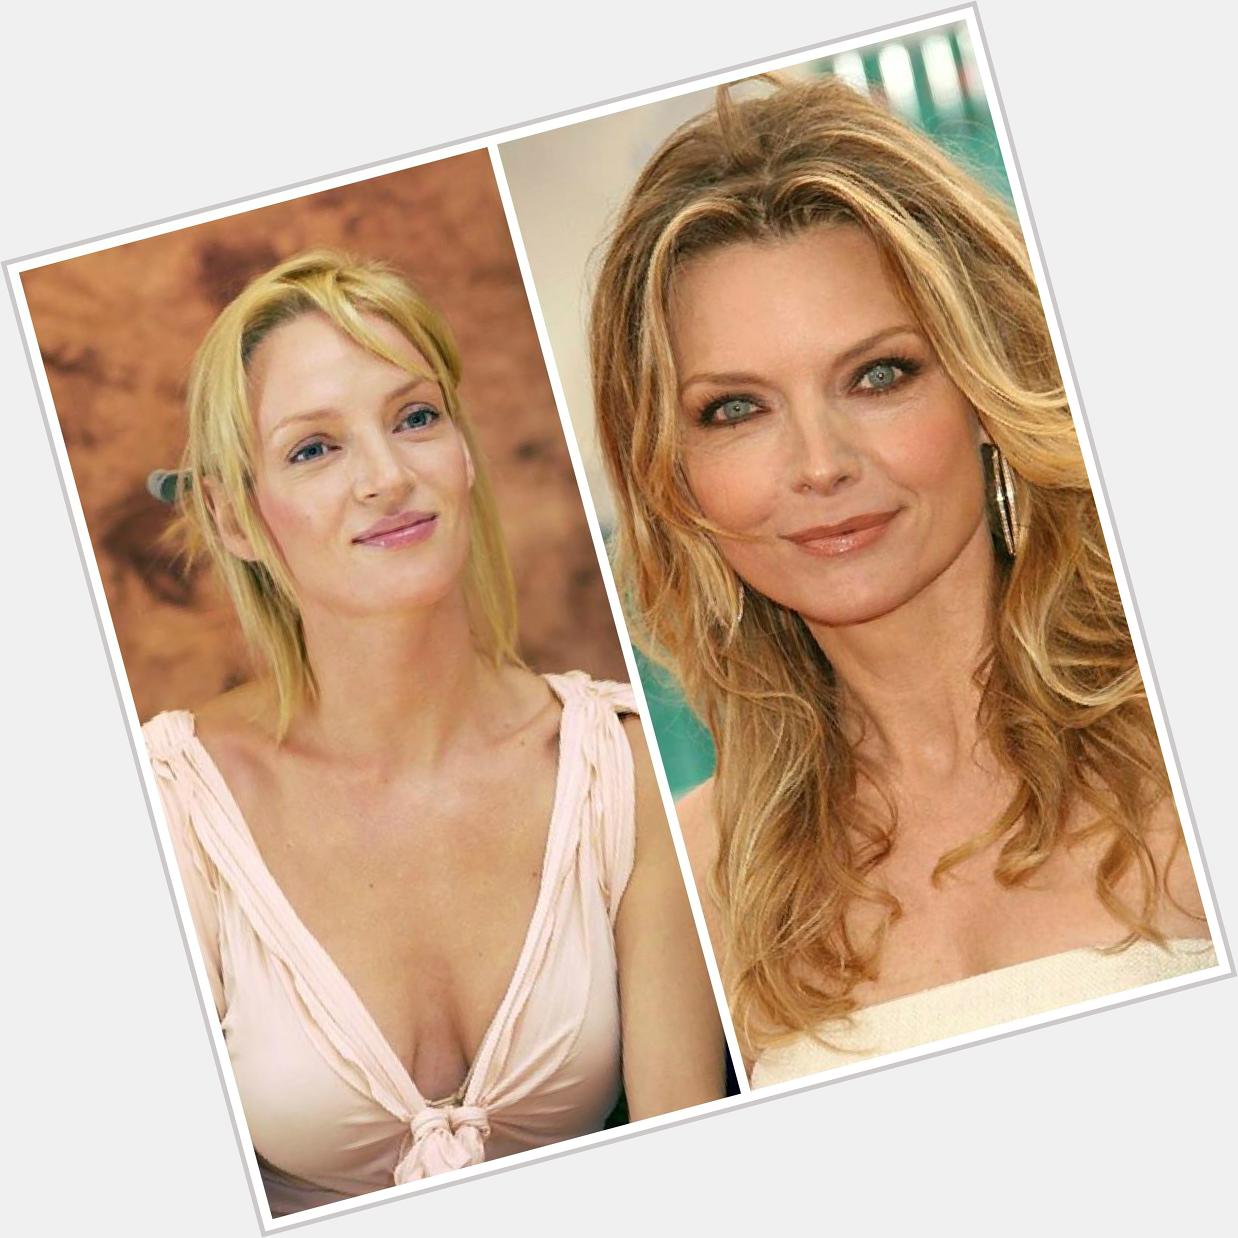 Two beauties were born on the same day: Happy birthday Uma Thurman & Michelle Pfeiffer! 